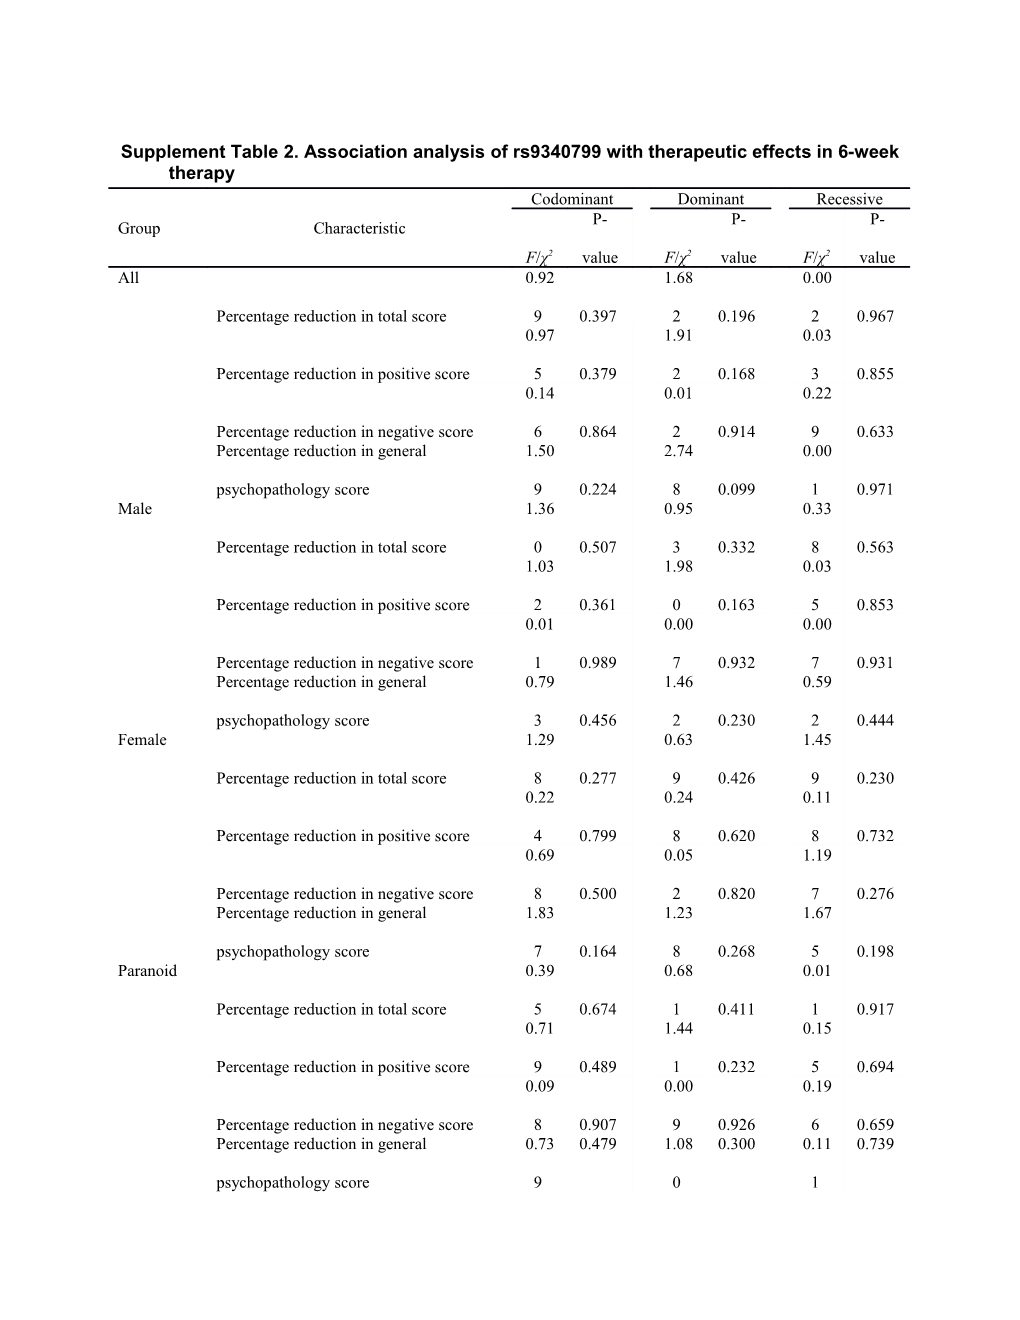 Supplement Table 2. Association Analysis of Rs9340799 with Therapeutic Effects in 6-Week Therapy